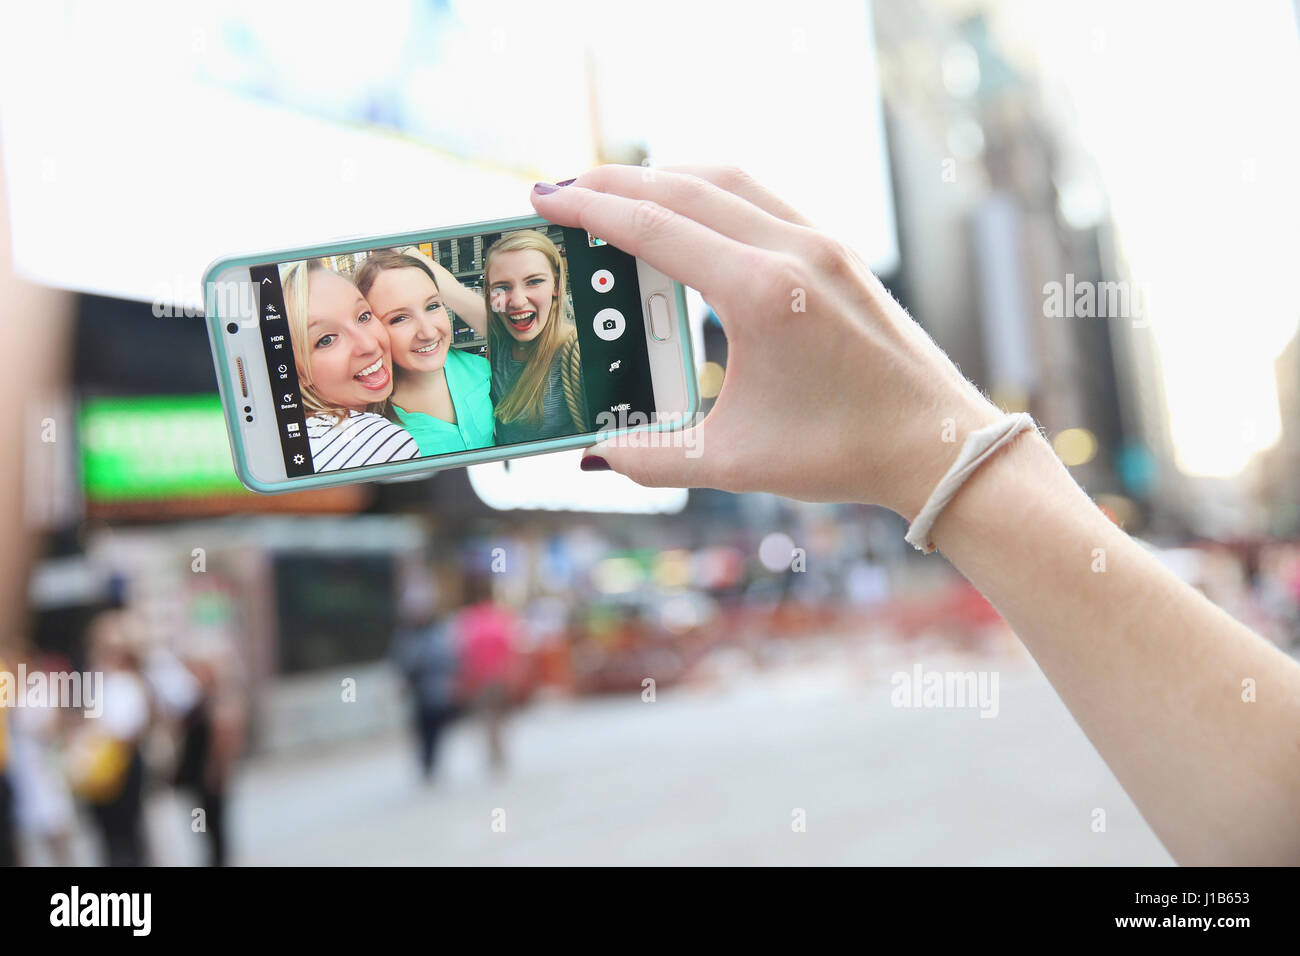 Arm of Caucasian woman posing for cell phone selfie with friends Stock Photo